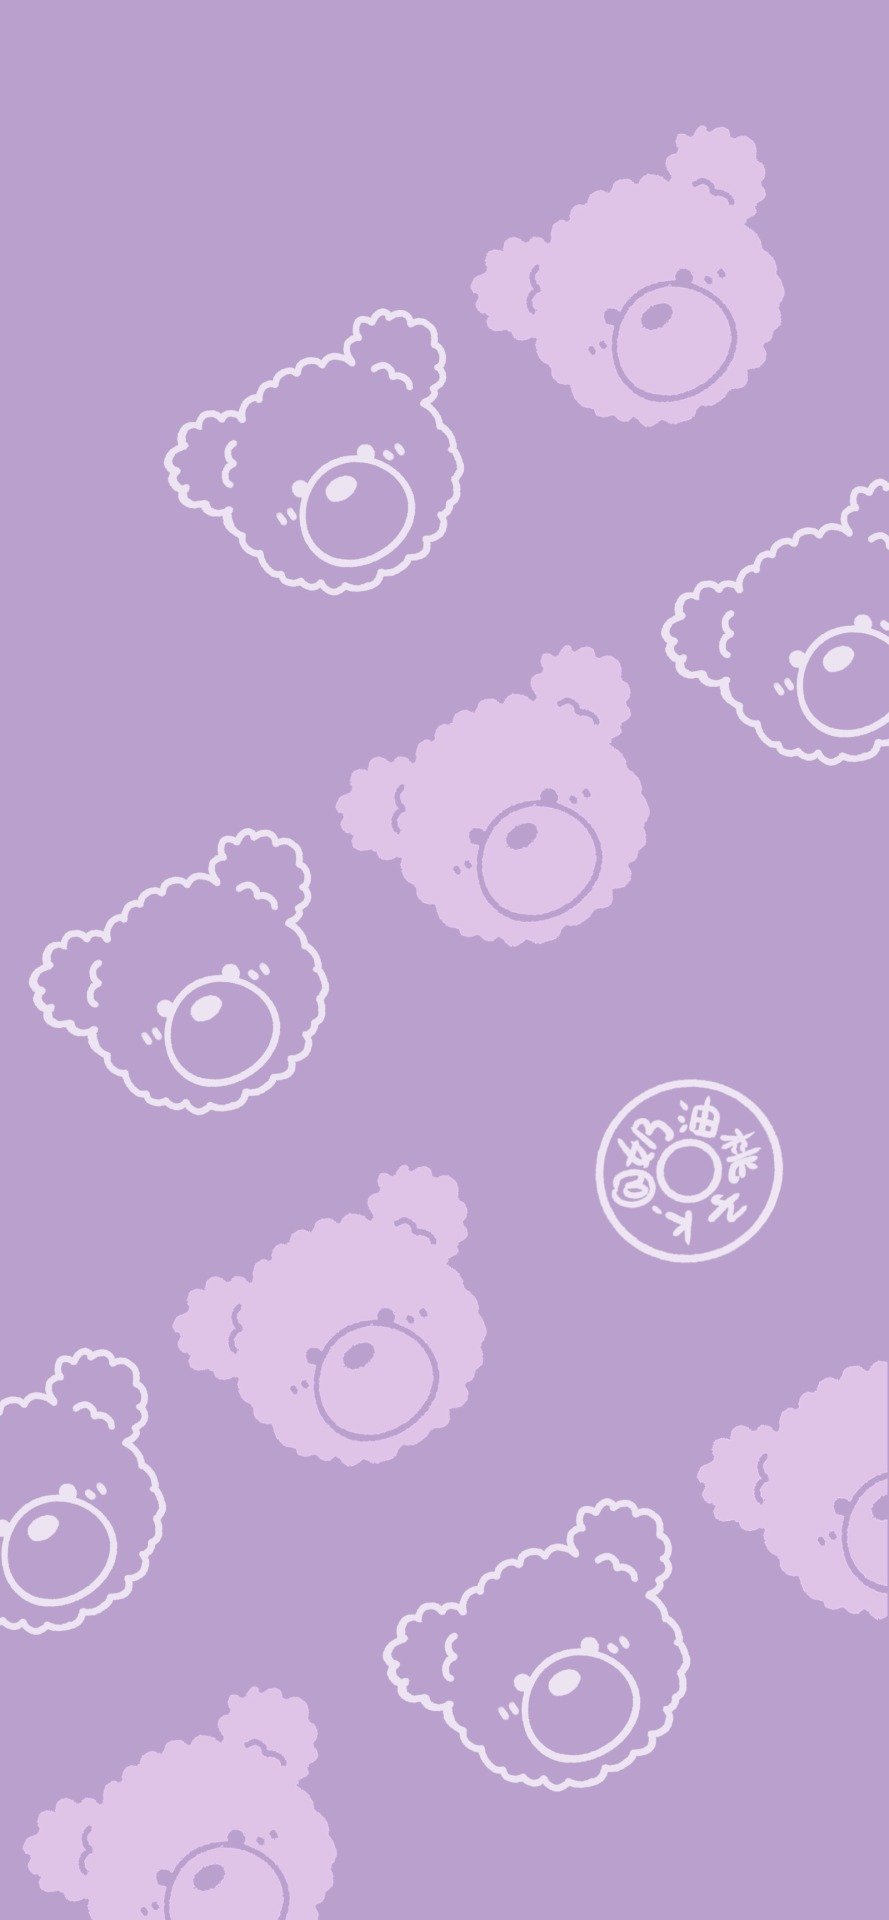 Purple Cute Bunny Texture Mobile Wallpaper Background Wallpaper Image For  Free Download  Pngtree